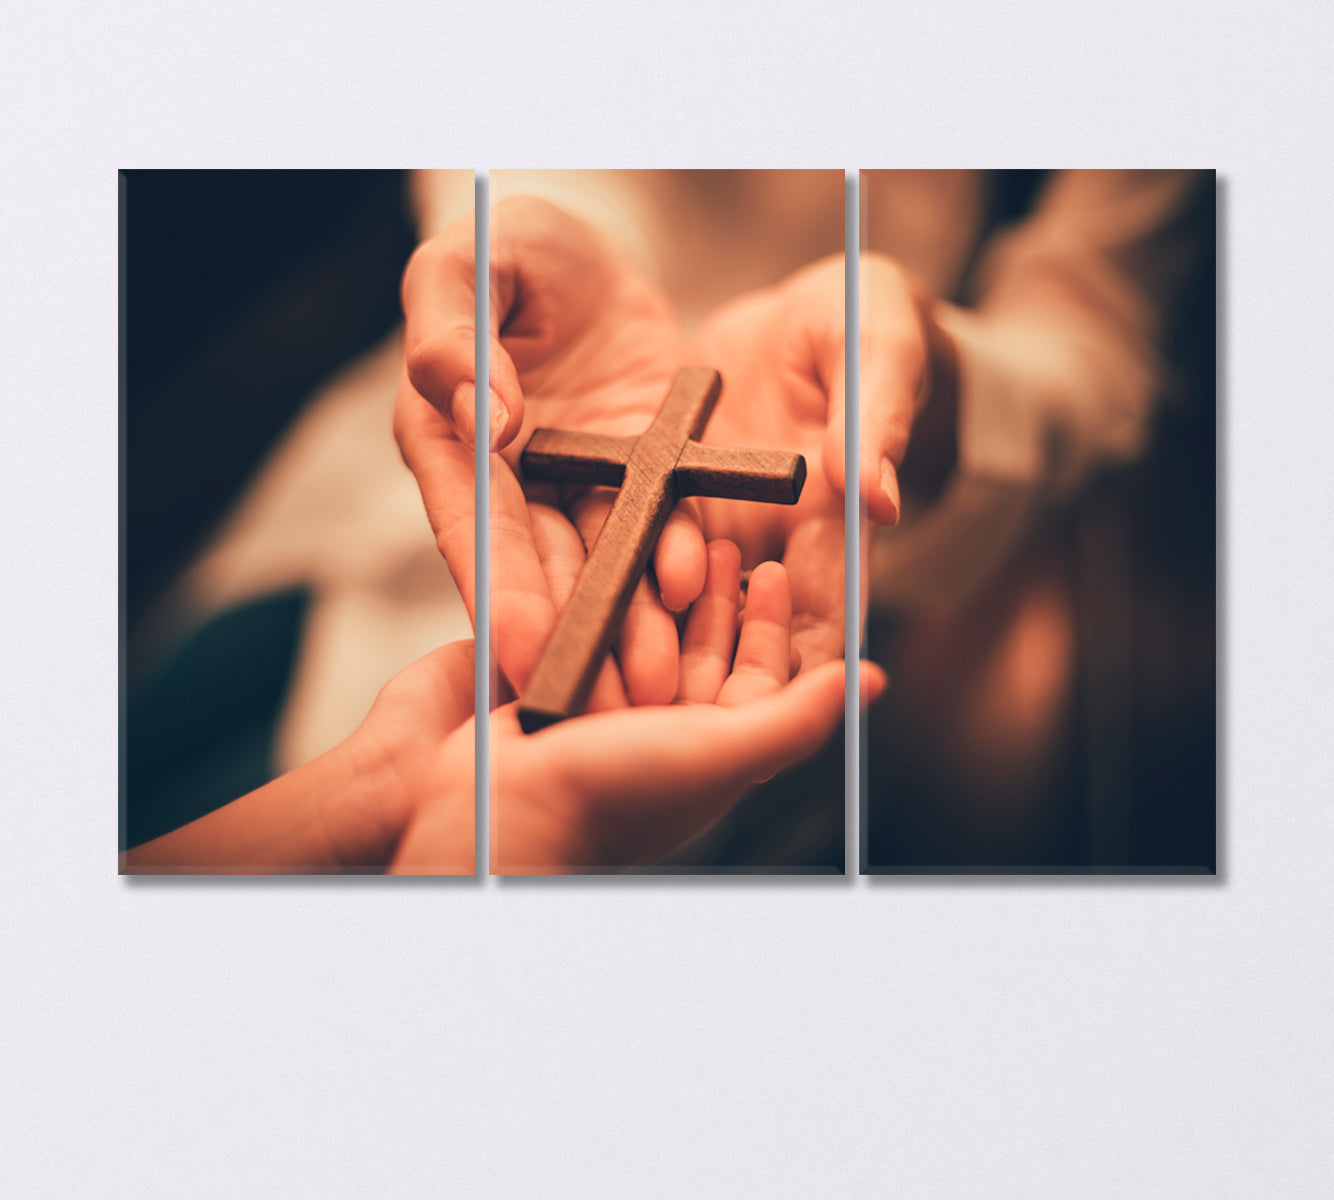 Woman's Hands with Cross Canvas Print-Canvas Print-CetArt-3 Panels-36x24 inches-CetArt